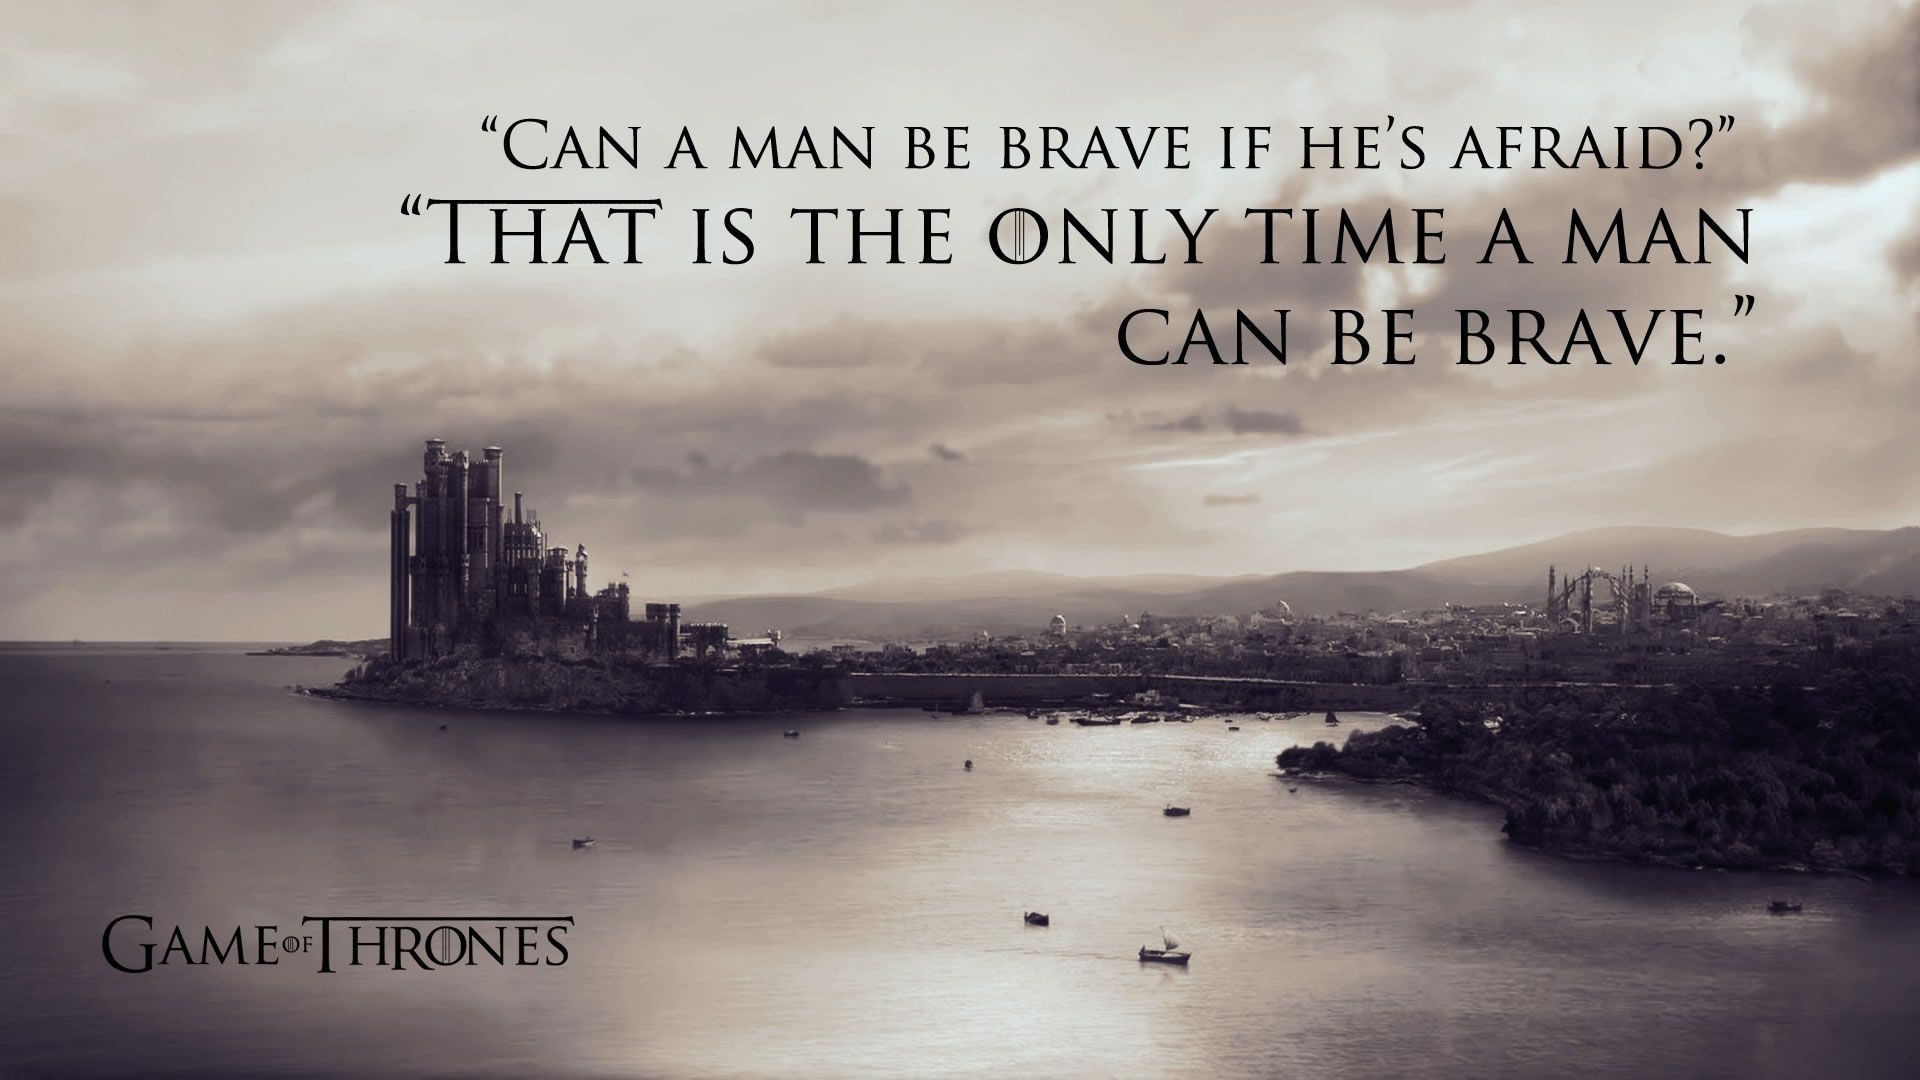 Check Out These Game Of Thrones Windows Wallpaper Words